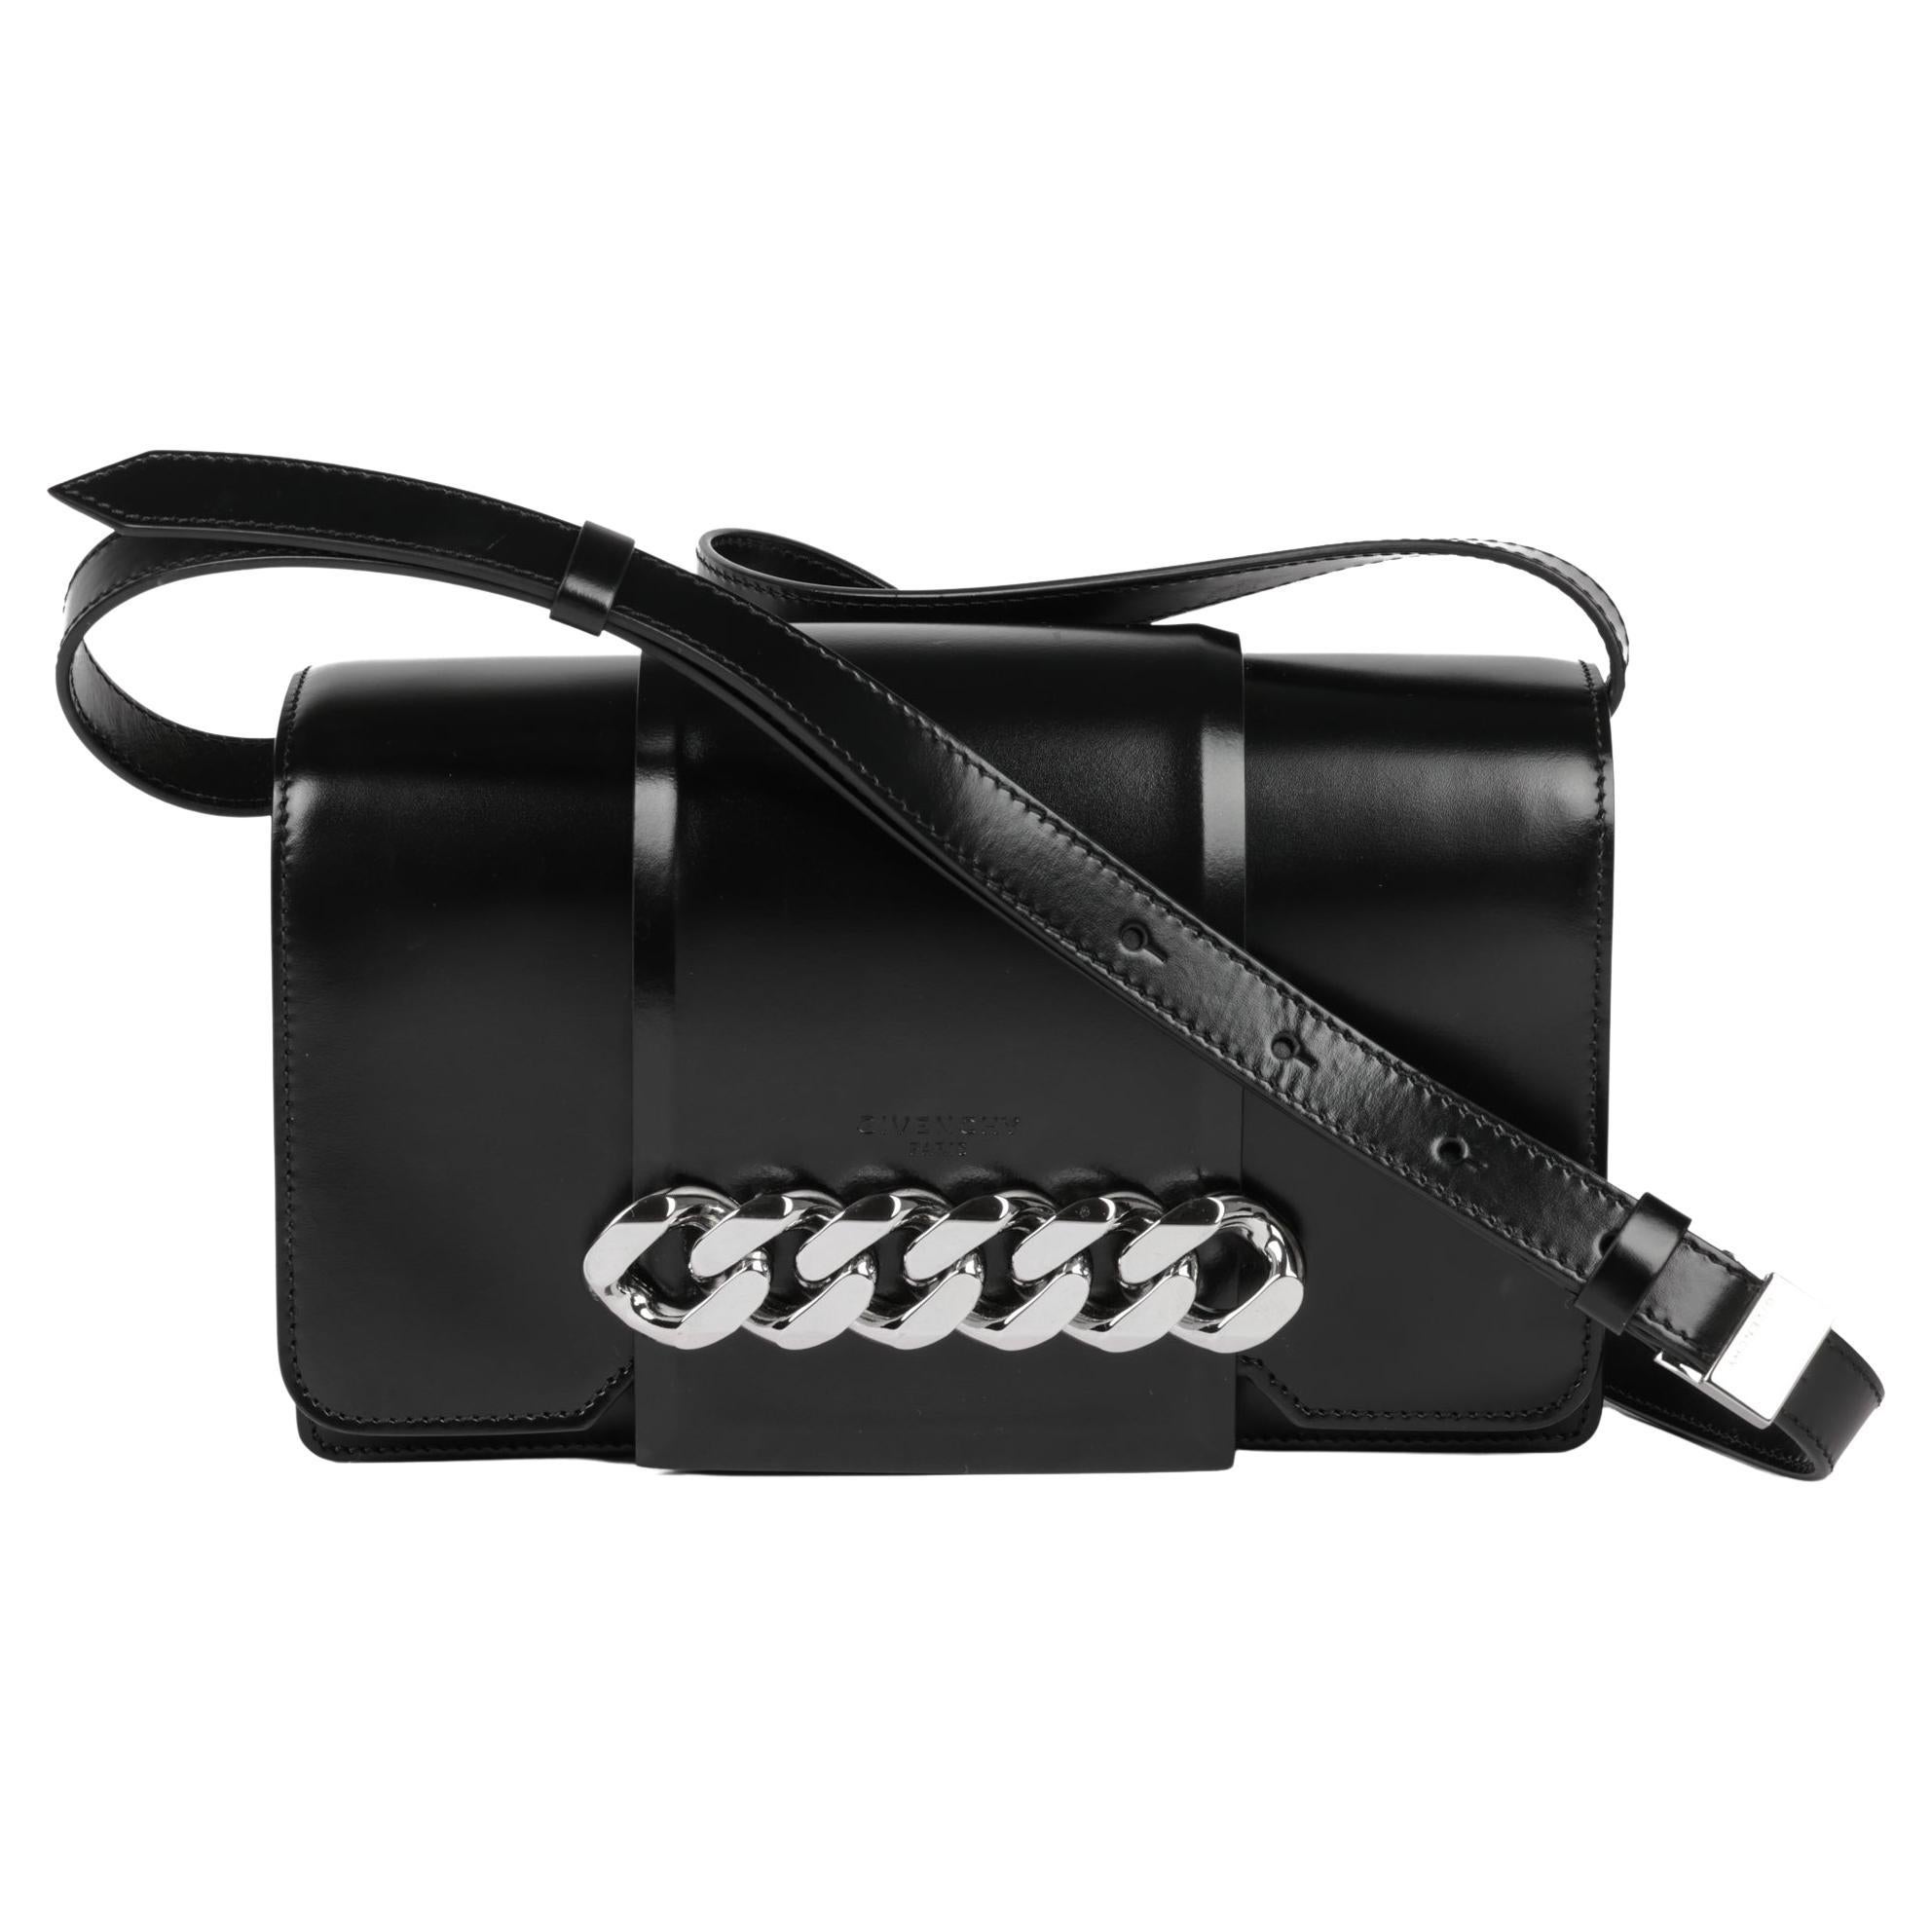 GIVENCHY Black Smooth Calfskin Leather Infinity Flap Bag